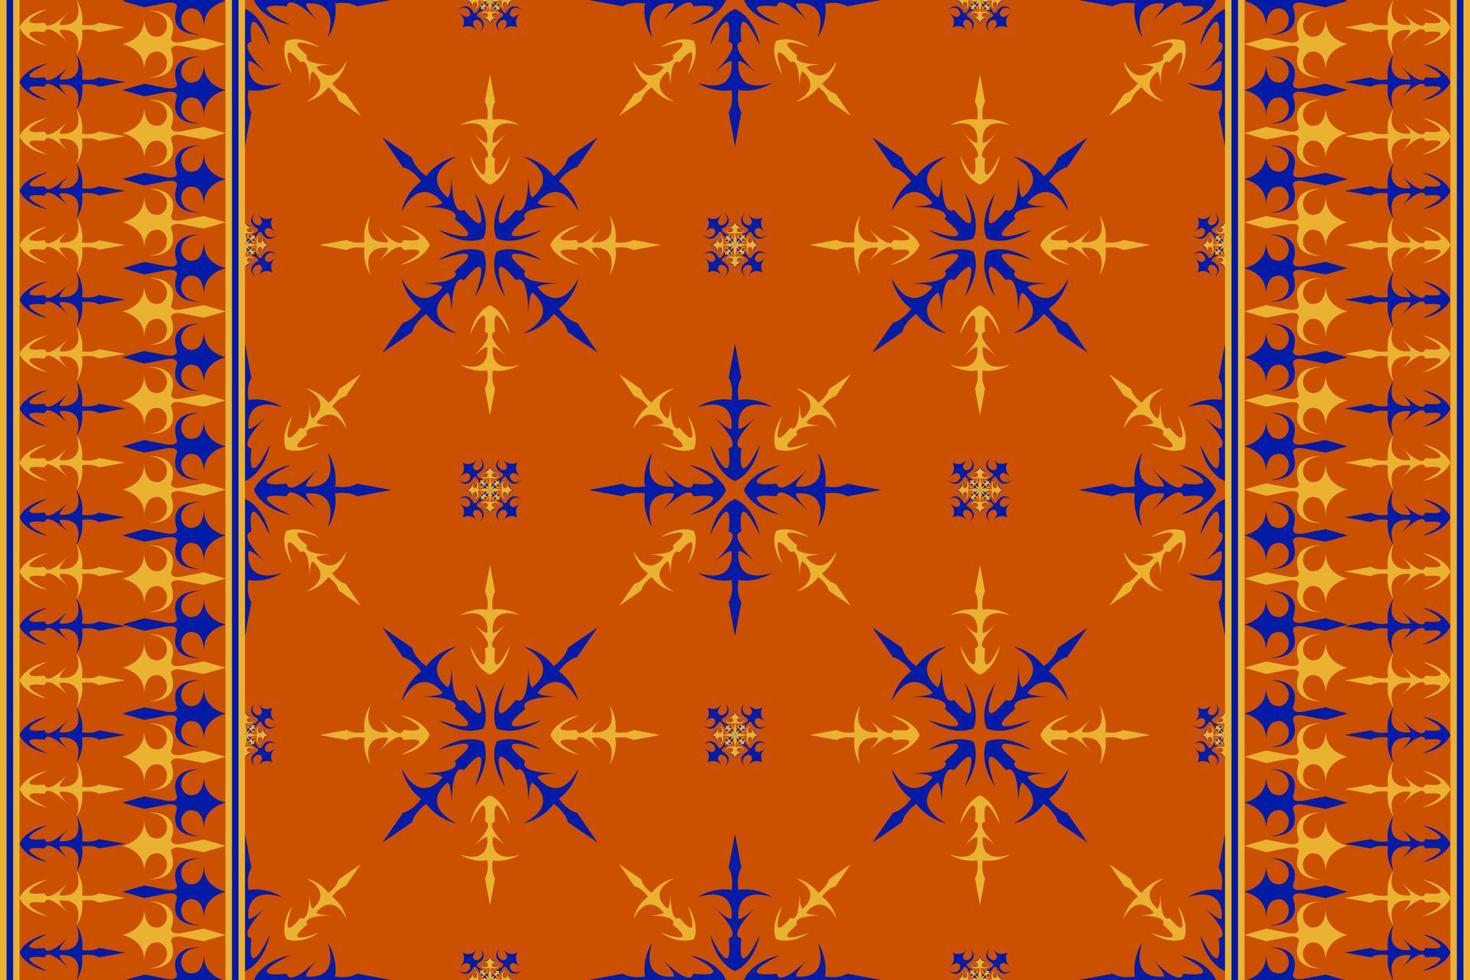 Ethnic folk seamless pattern in orange, blue and yellow tone in vector illustration design for fabric, mat, carpet, scarf, wrapping paper, tile and more